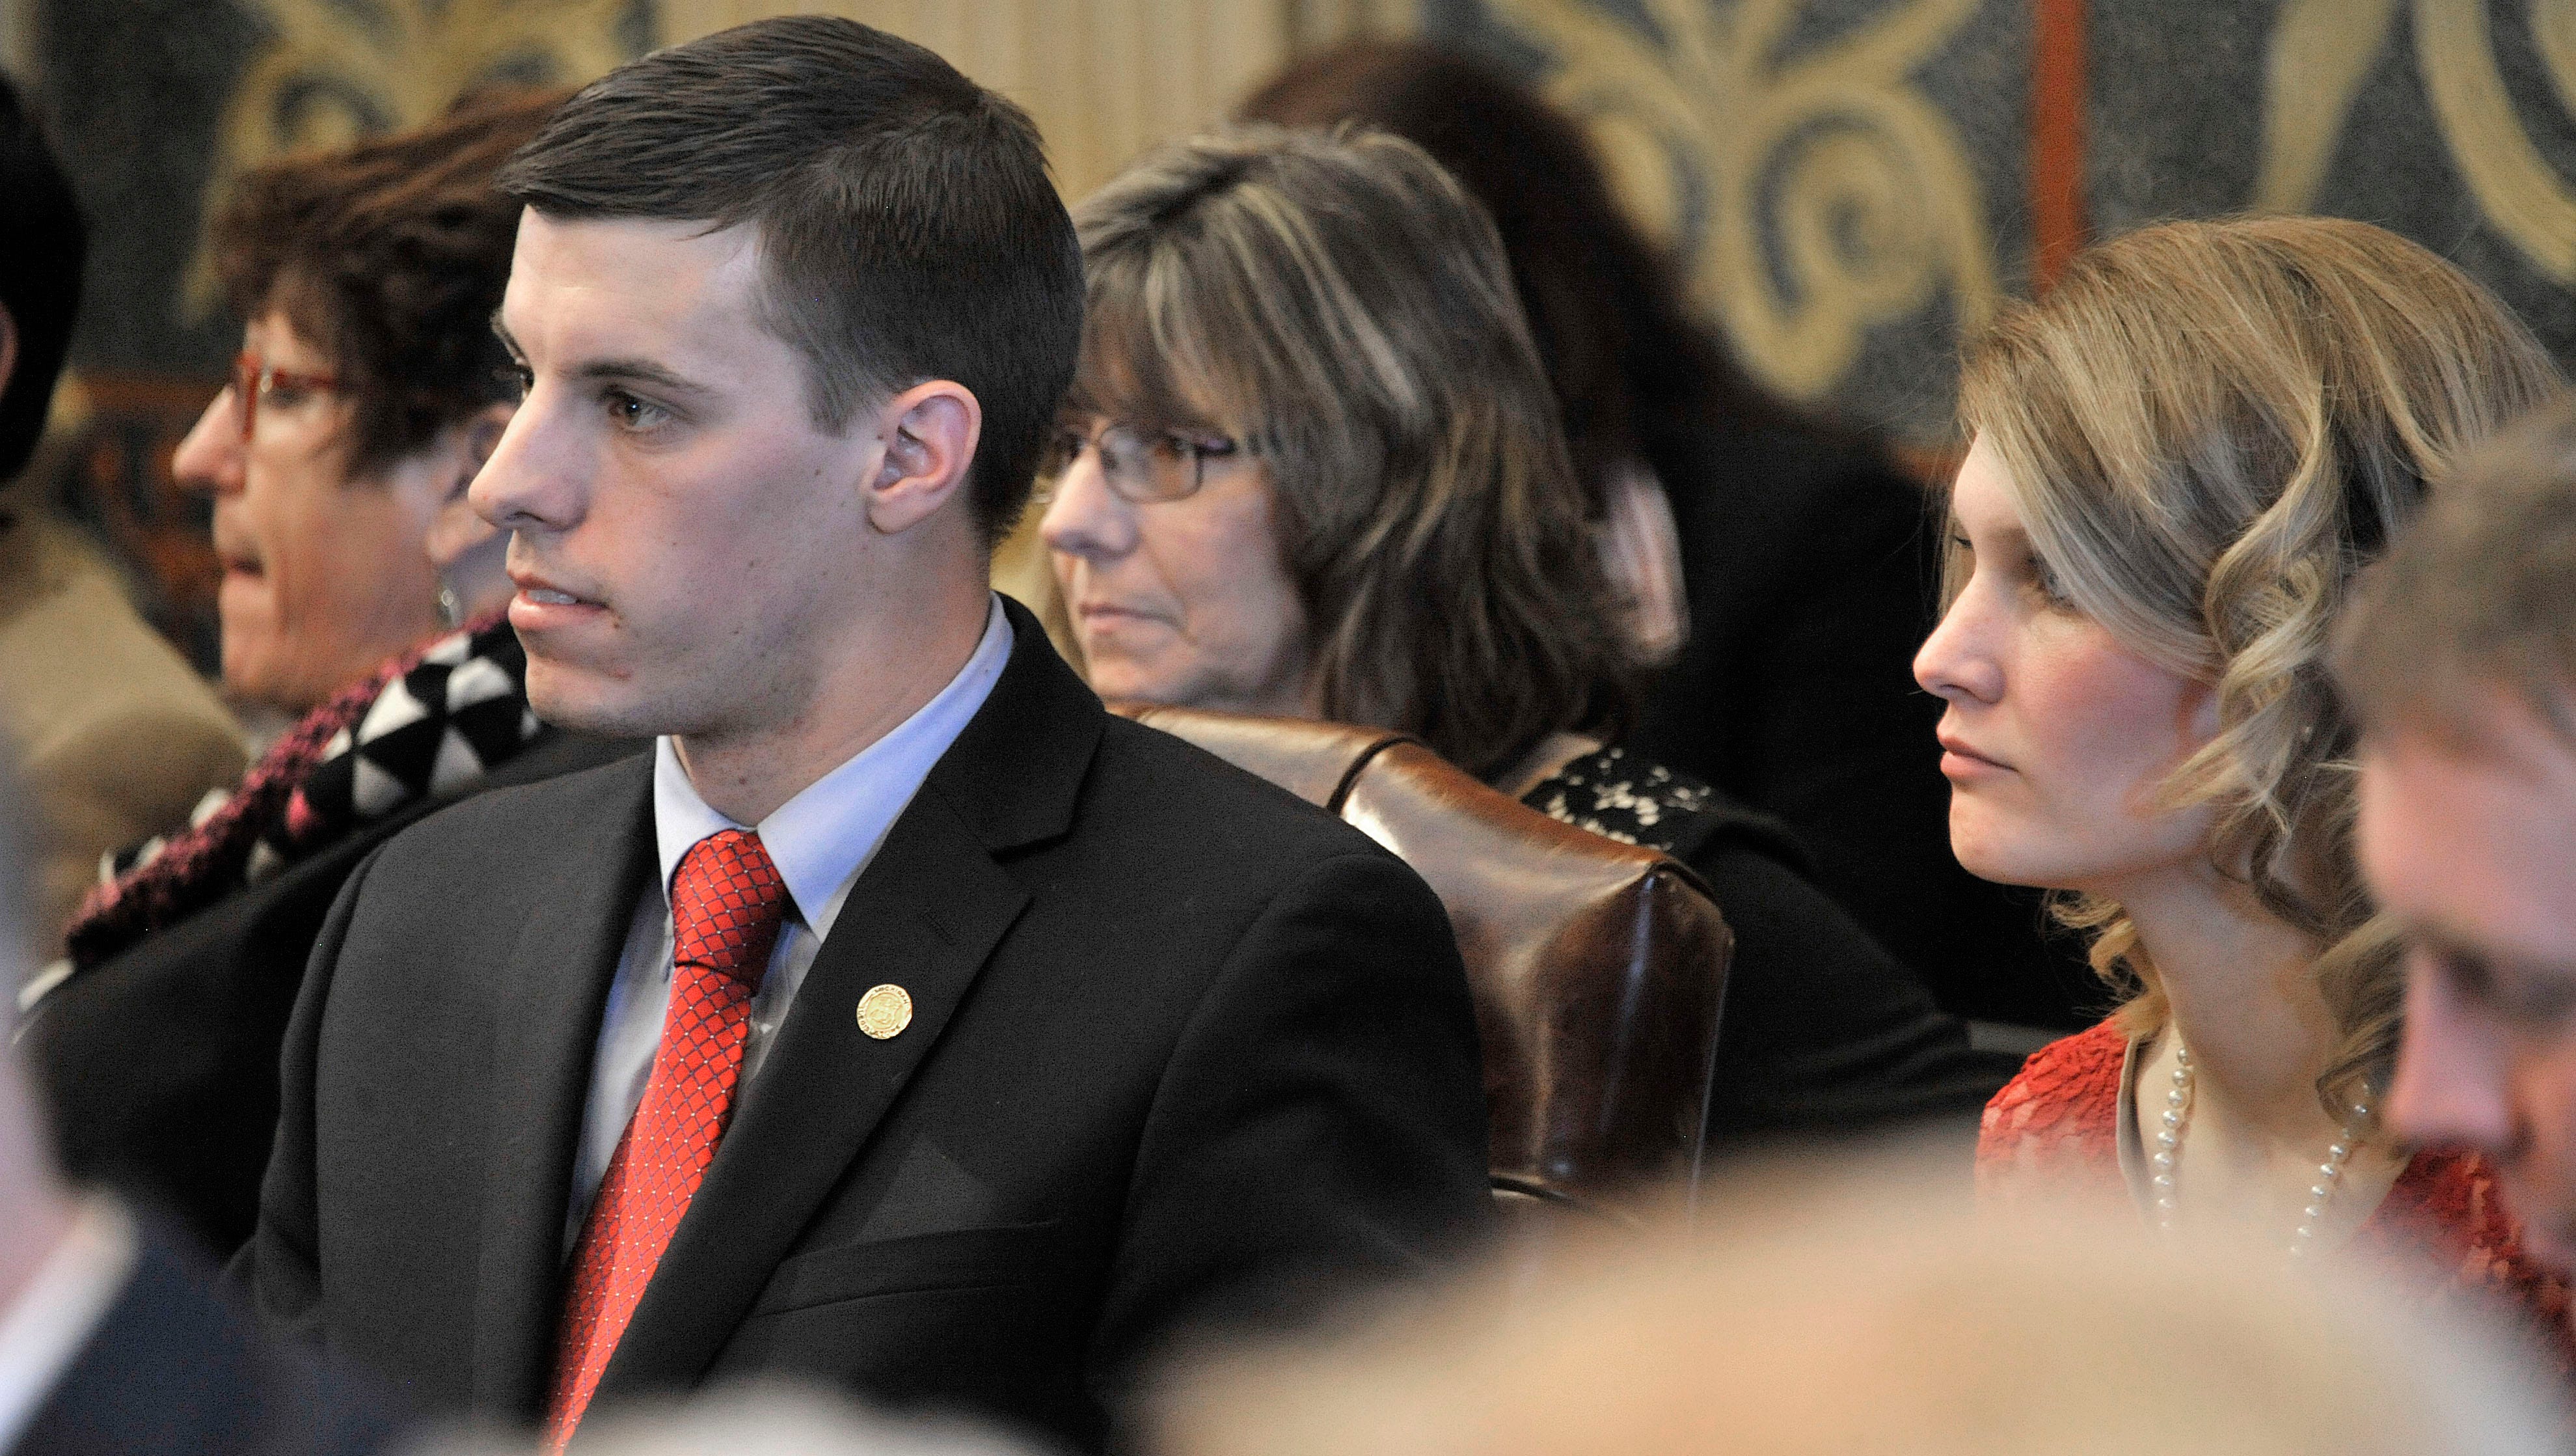 Rep. Lee Chatfield, R-Levering, sits with his wife Stephanie, far right, after taking his oath of office.